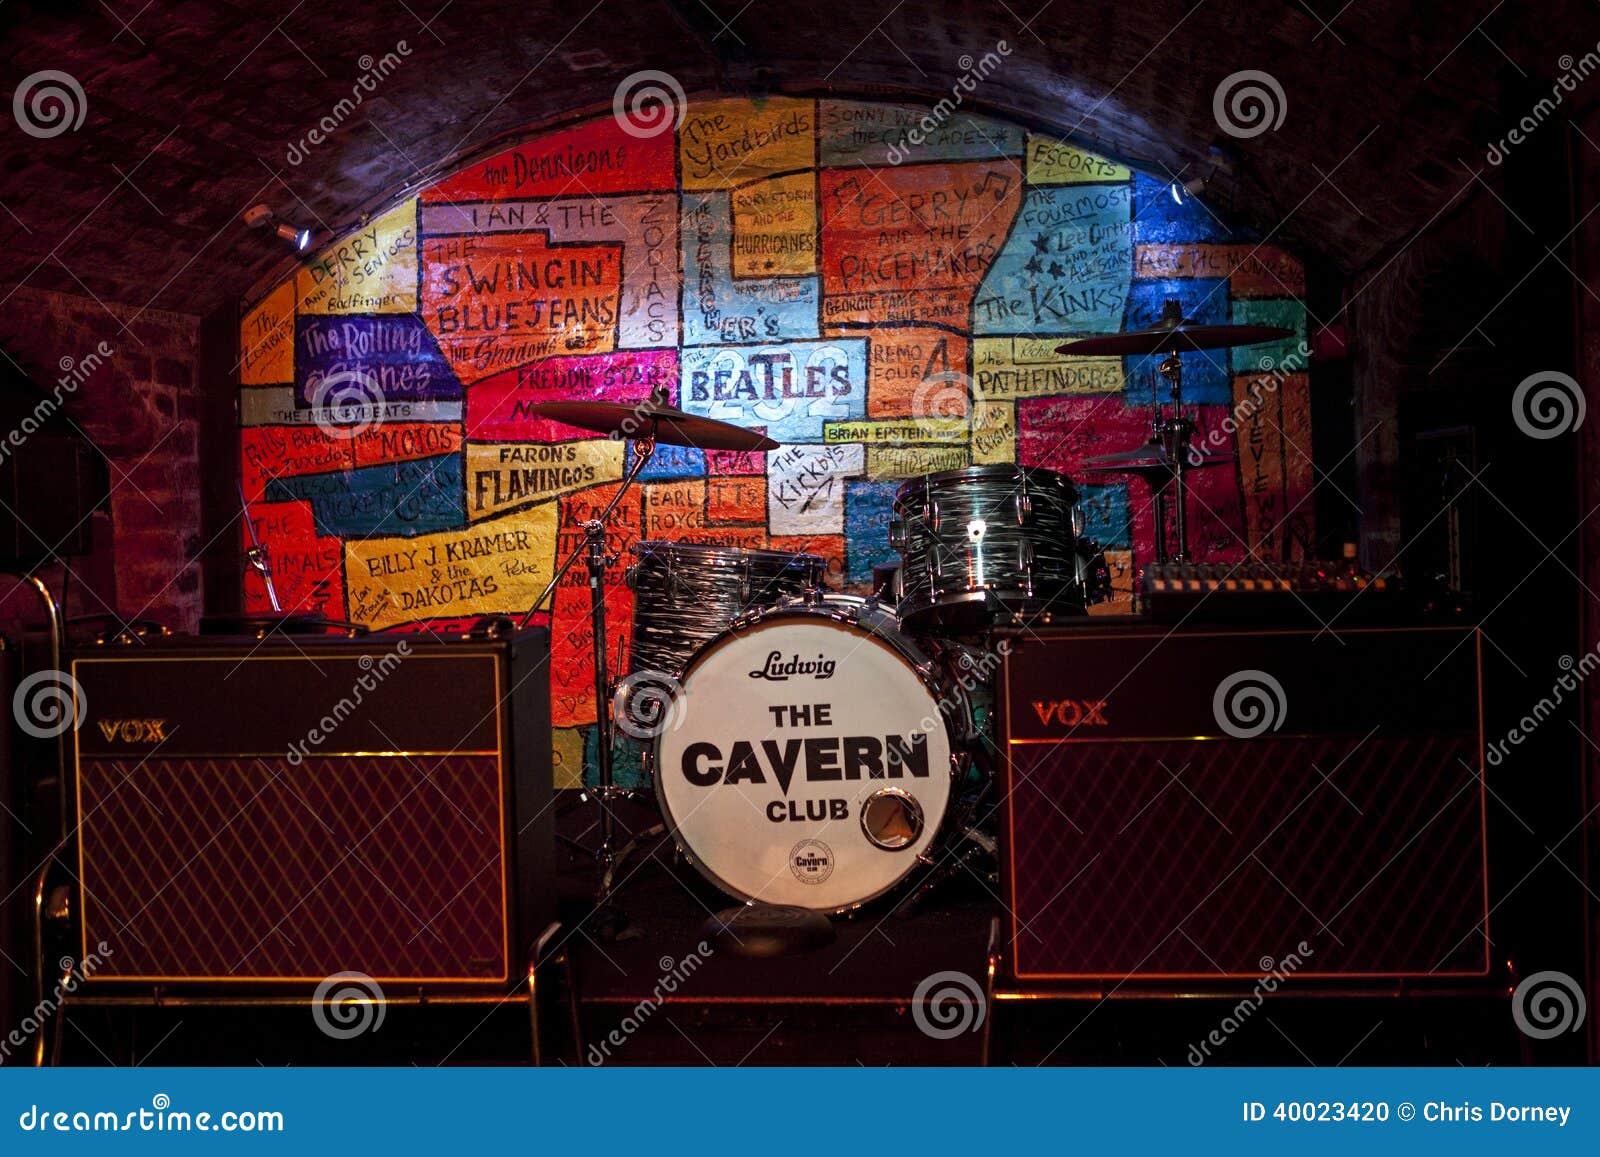 The Cavern Club In Liverpool Editorial Image - Image of matthew, mccartney: 400234201300 x 957